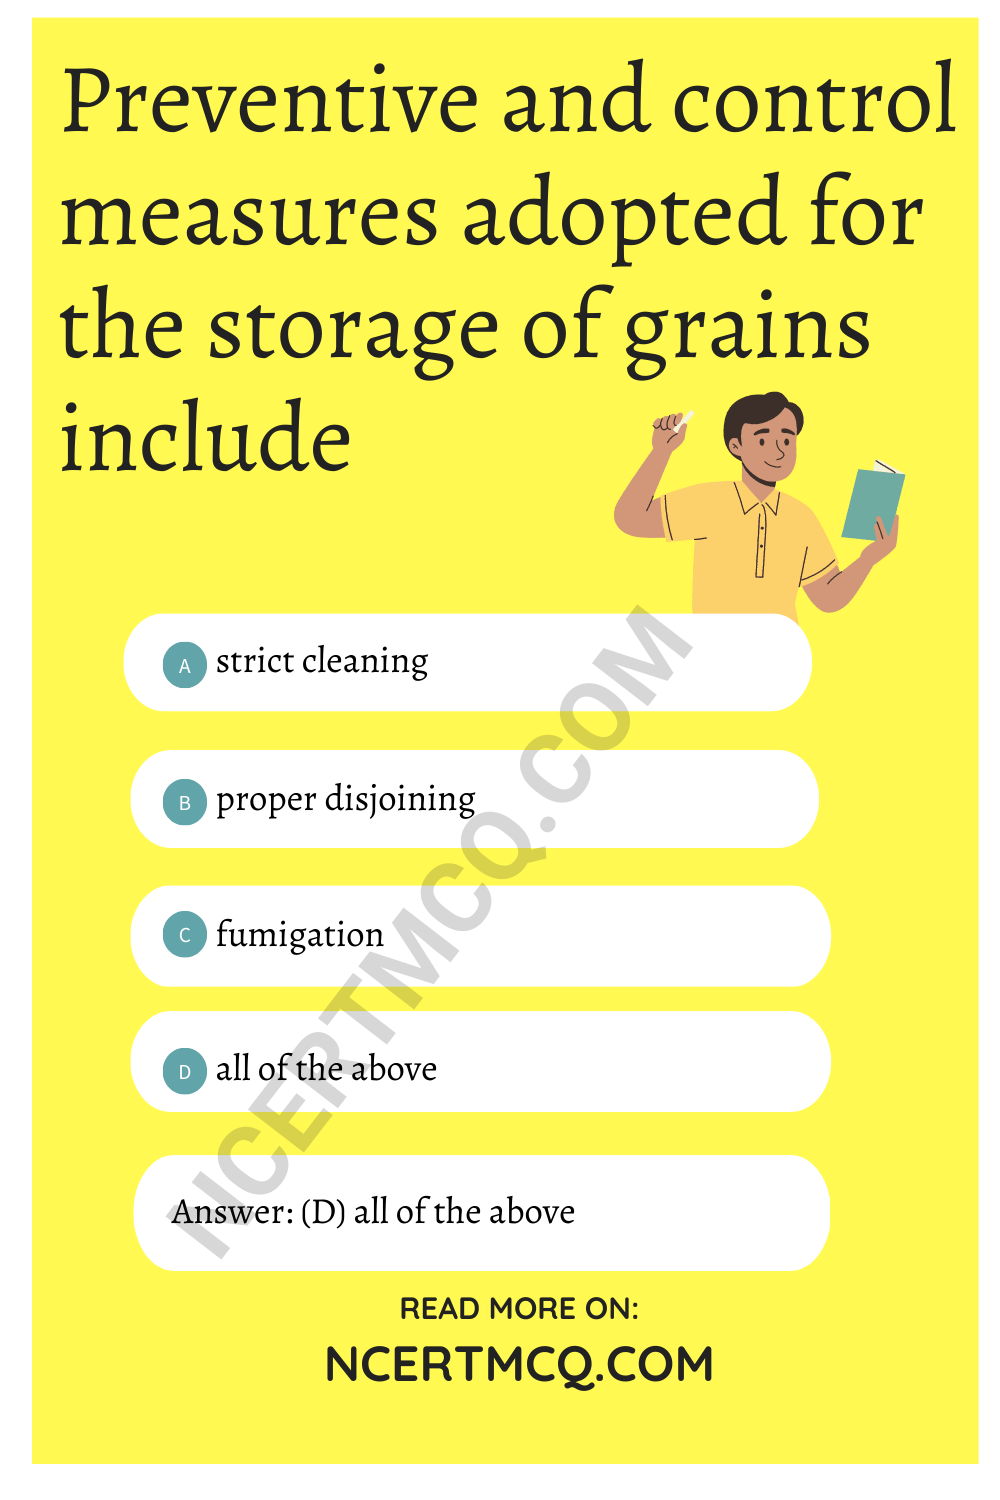 Preventive and control measures adopted for the storage of grains include